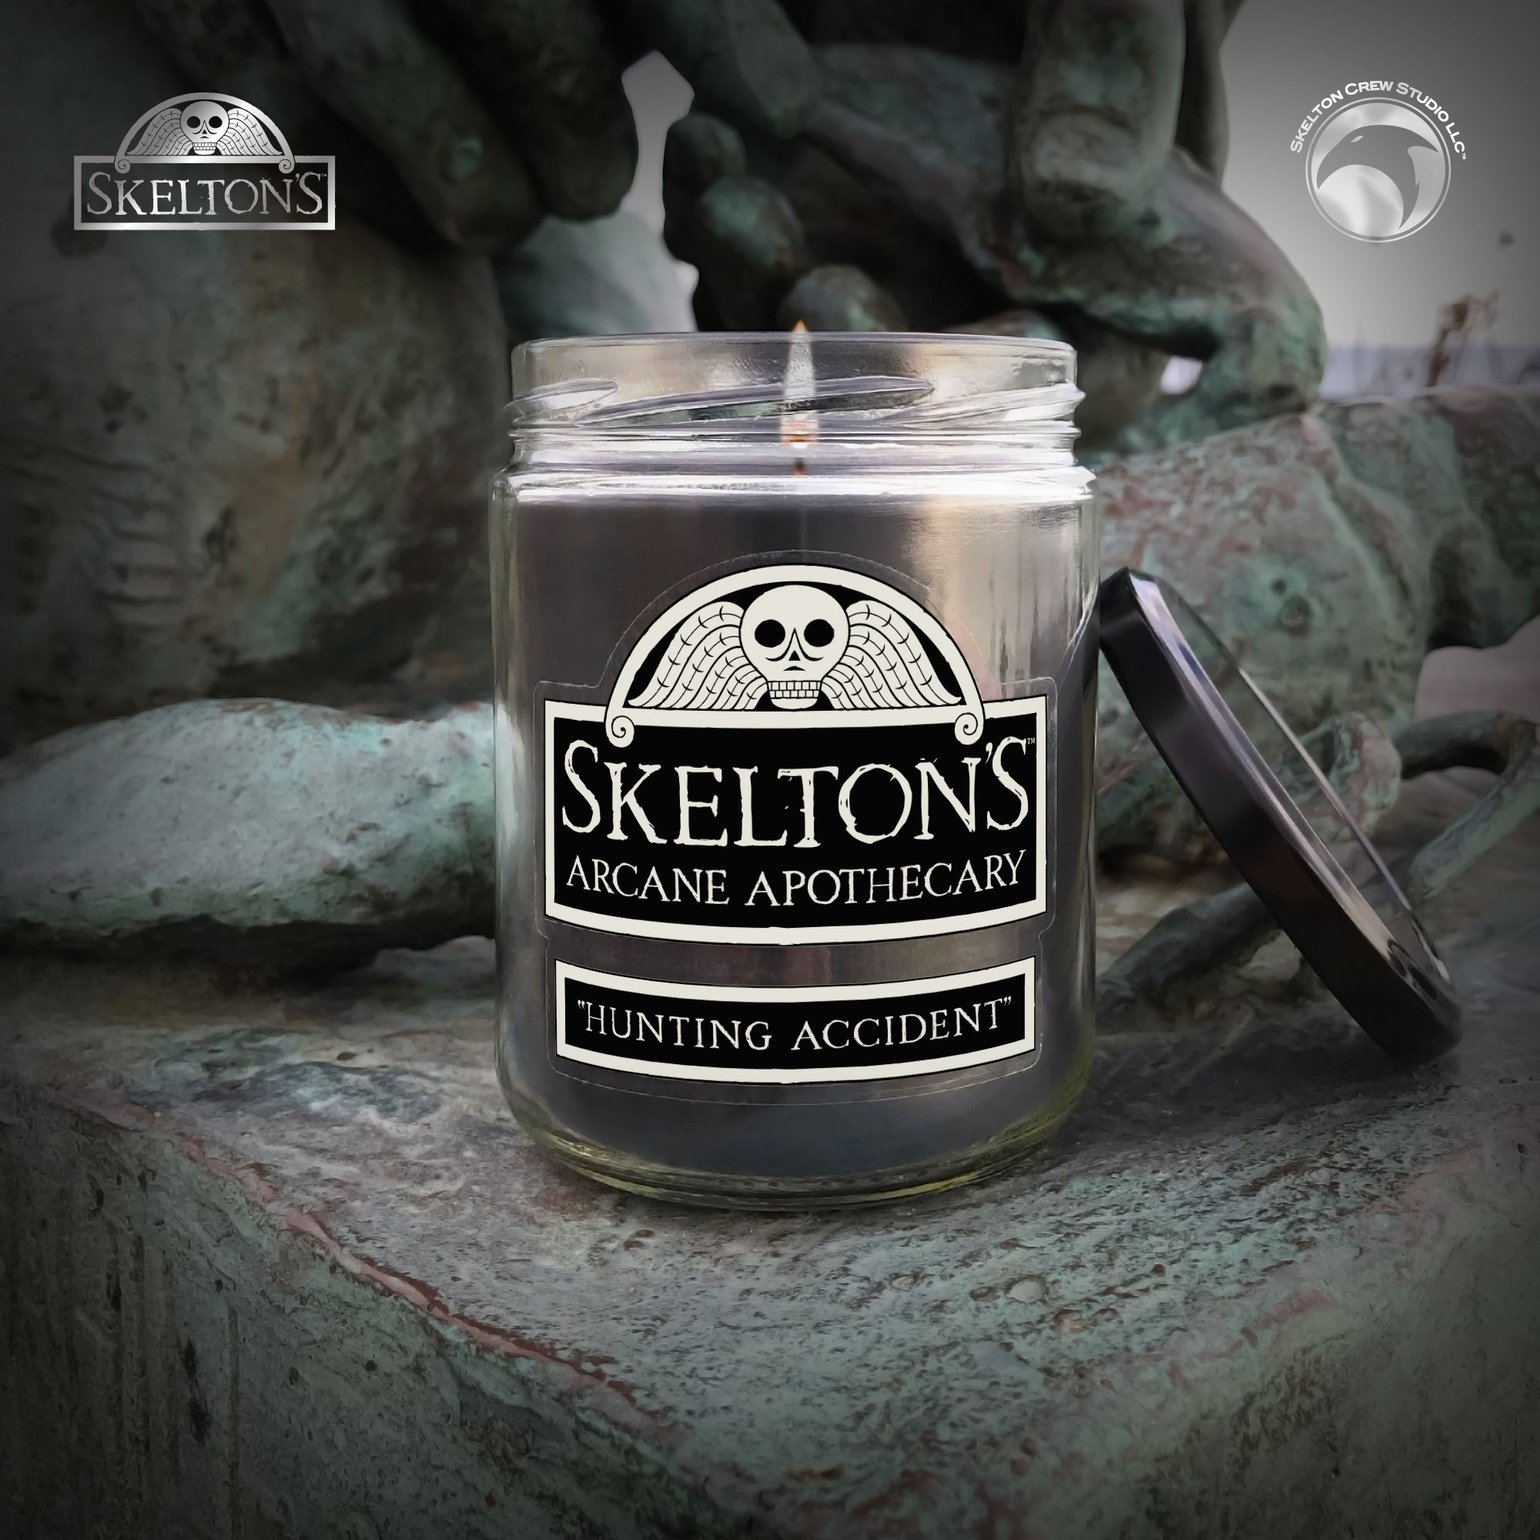 Image of Skelton's Arcane Apothecary: "Hunting Accident" candle! FREE U.S. SHIPPING!